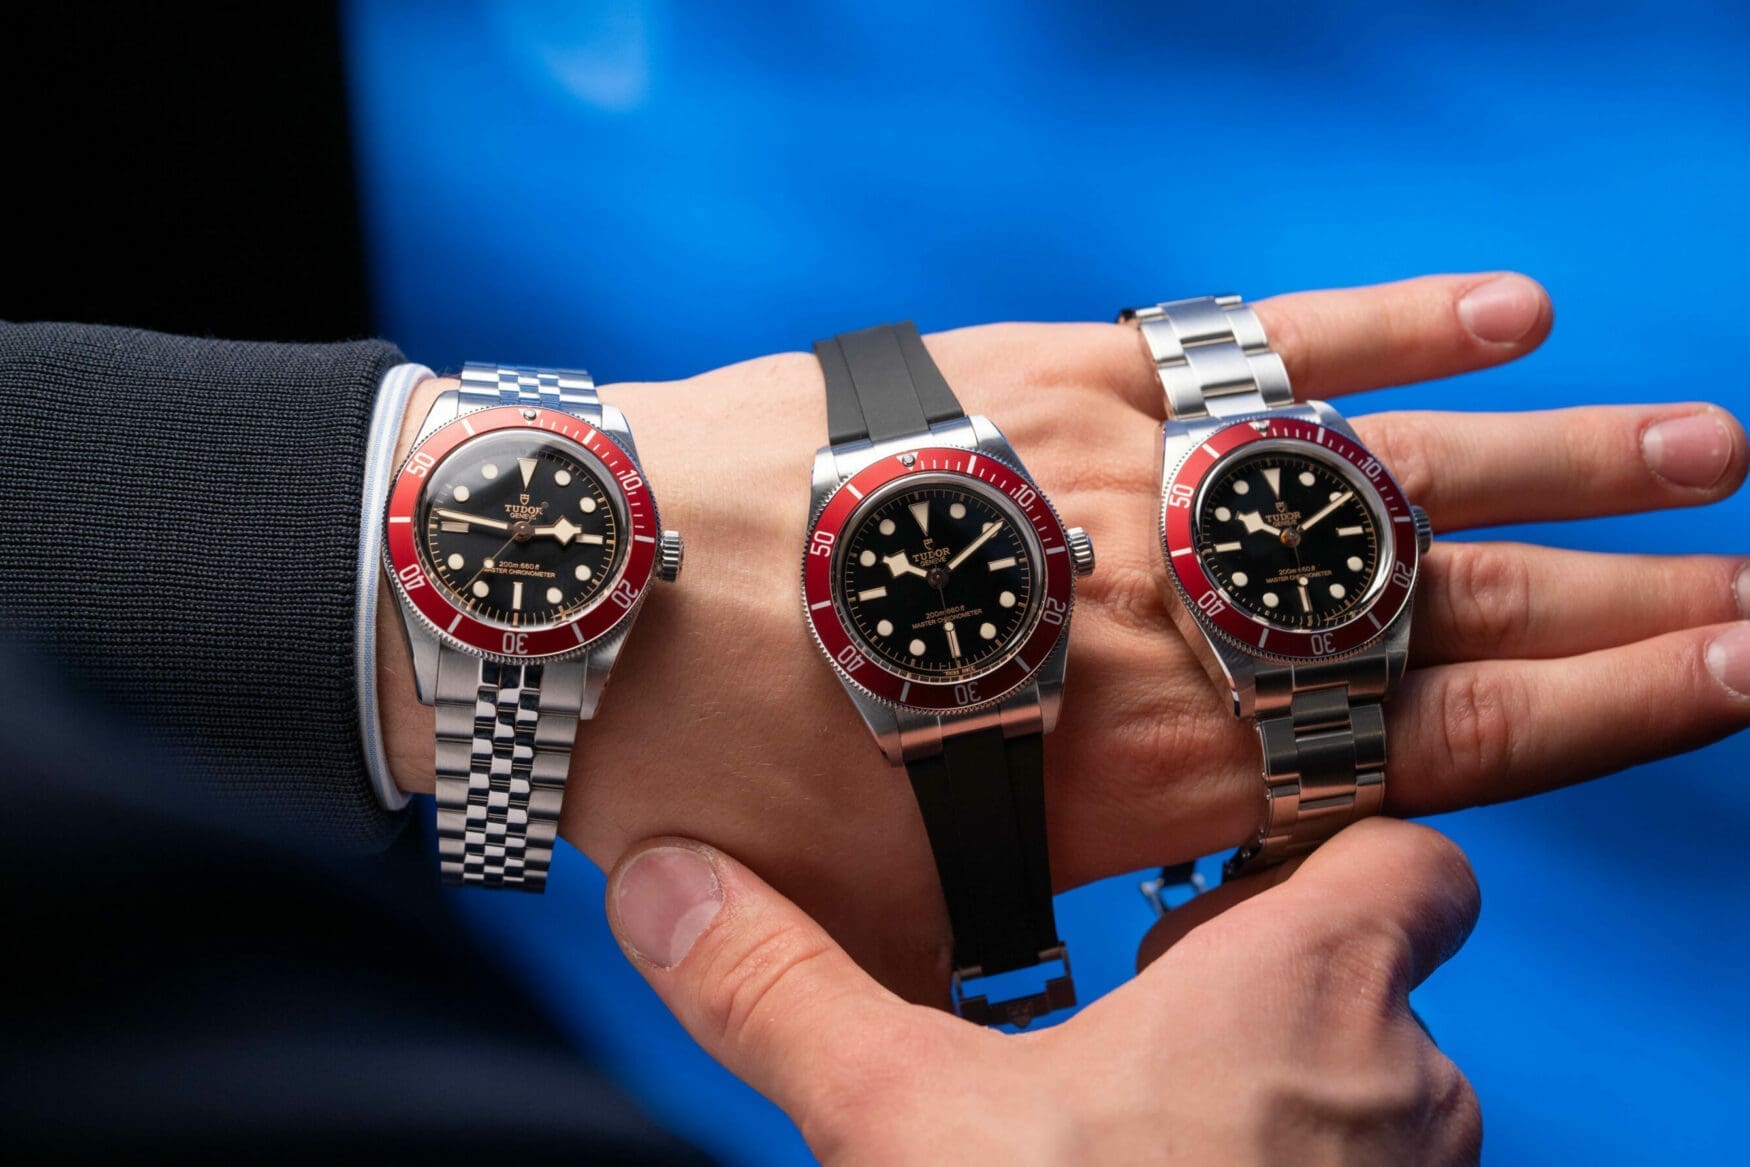 With the new Tudor Black Bay 41 and Black Bay 54, is the BB58 in danger of becoming obsolete?